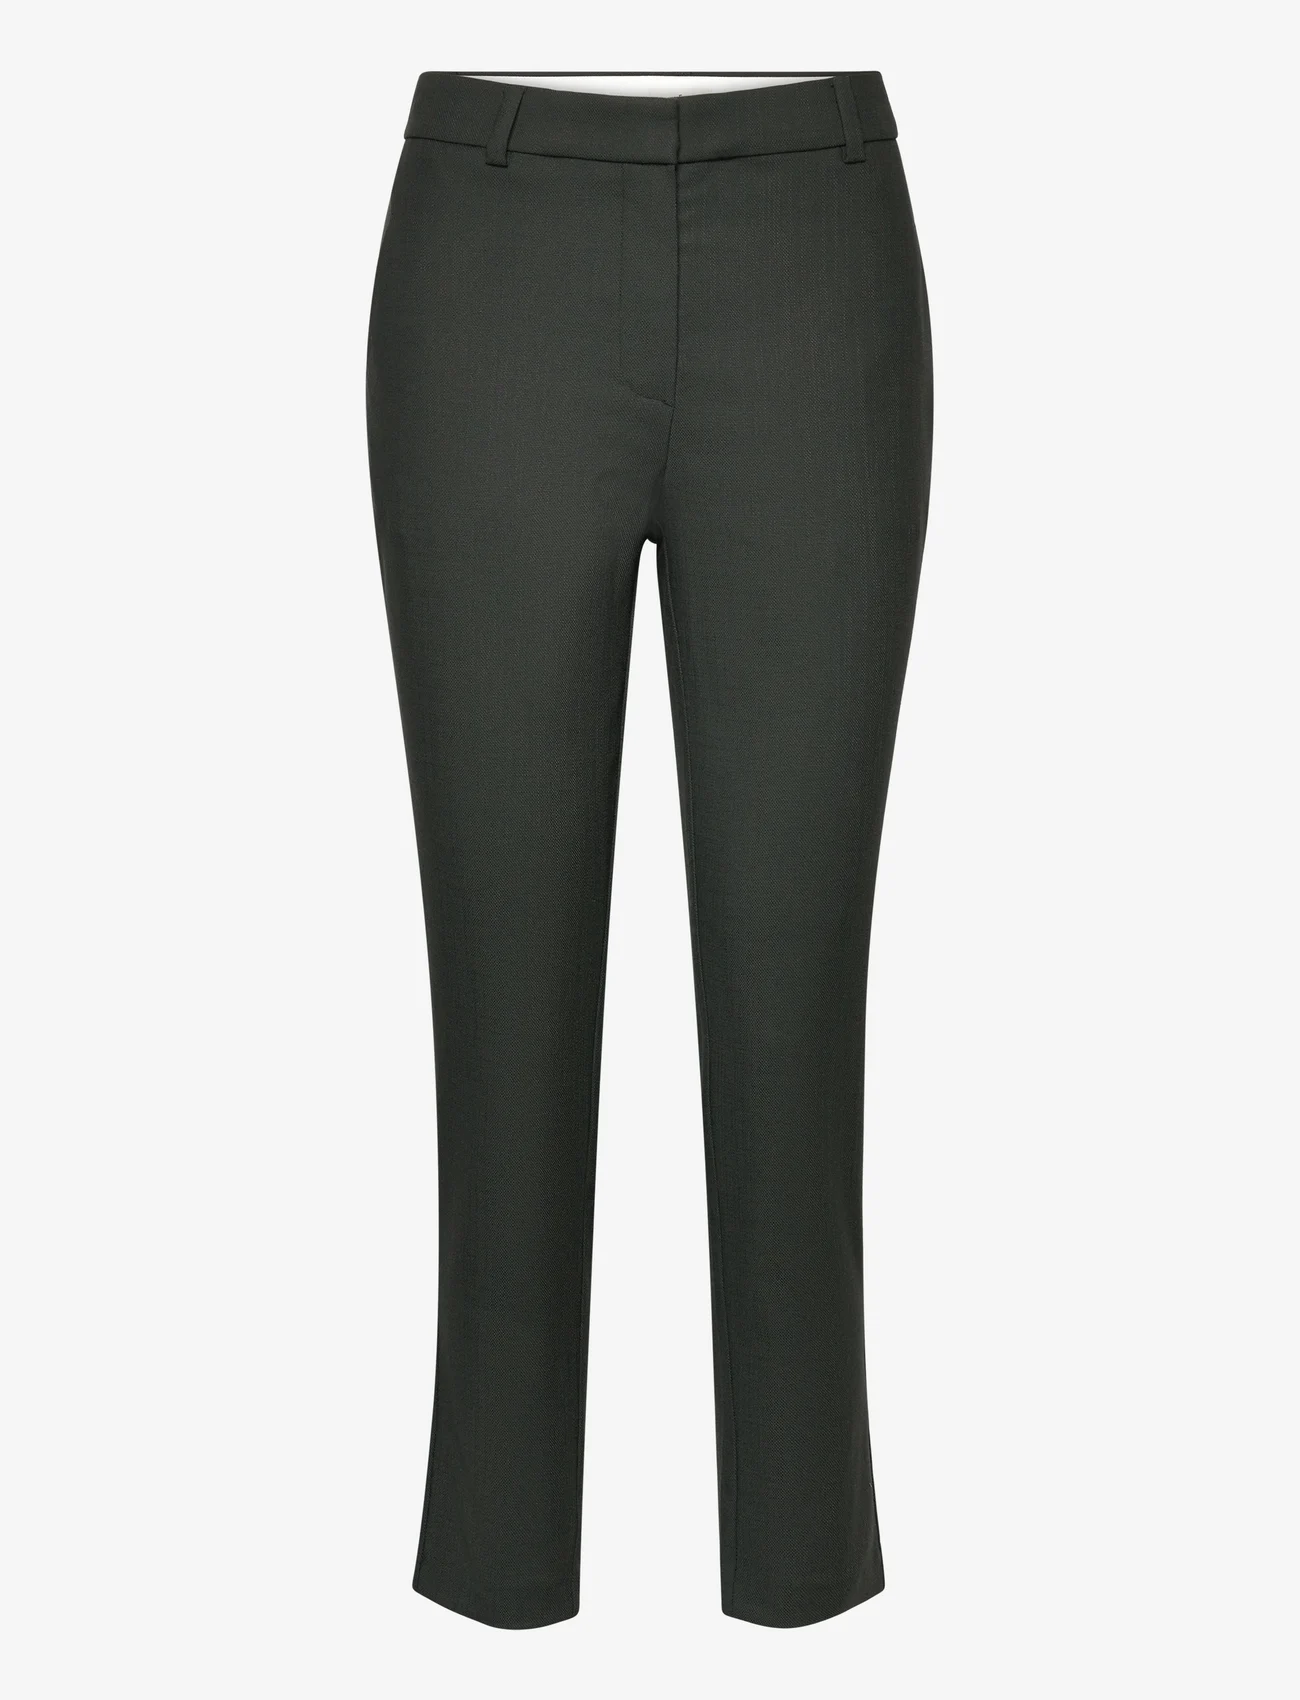 FIVEUNITS - Kylie Crop - straight leg trousers - forest green - 0